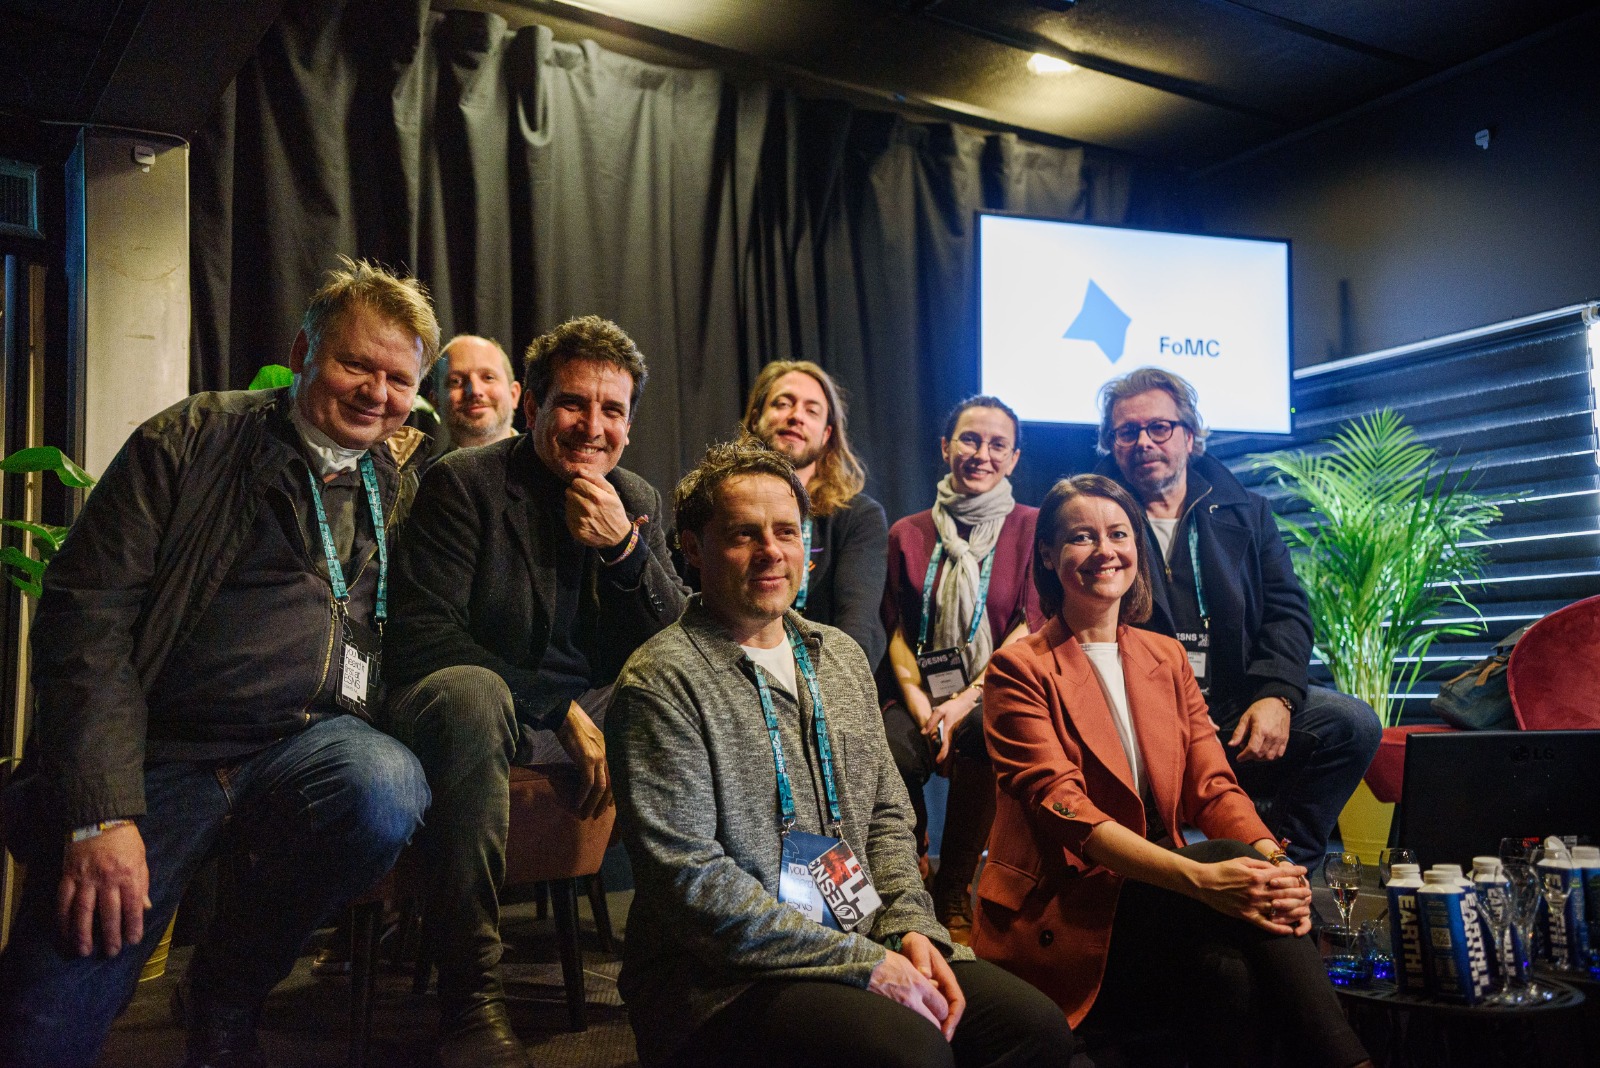 Federation of Music Conferences launched at ESNS